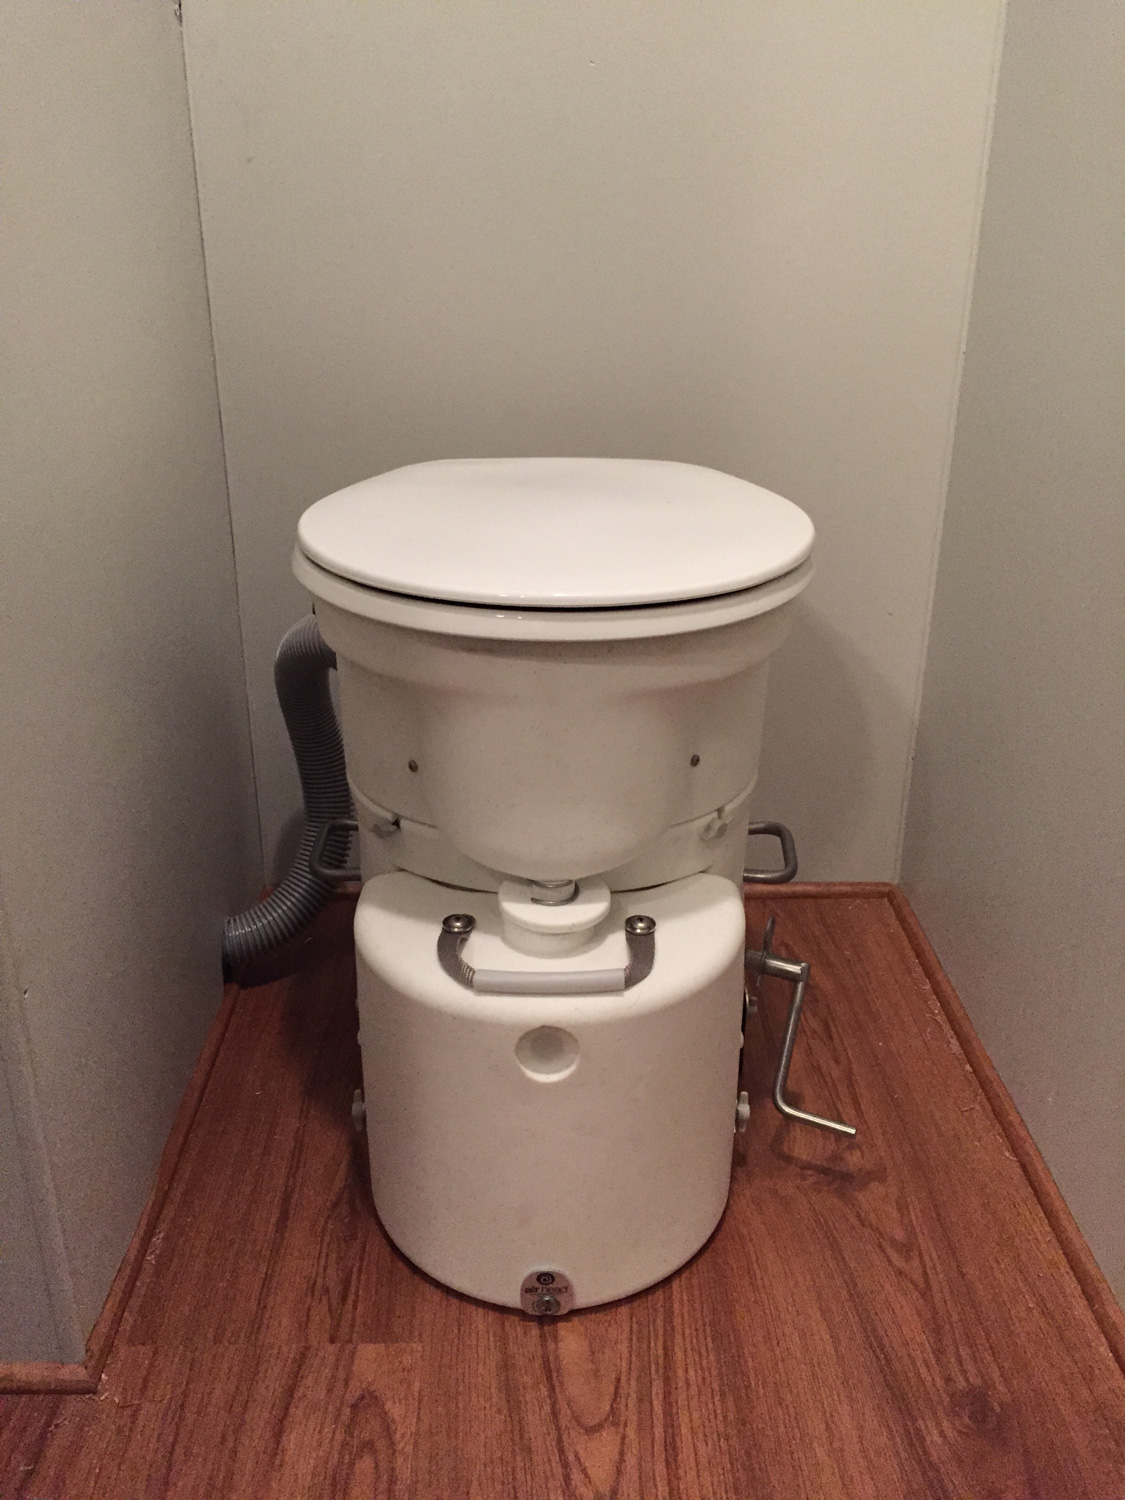  Instead of a traditional RV toilet, we installed an Air Head composting toilet. 